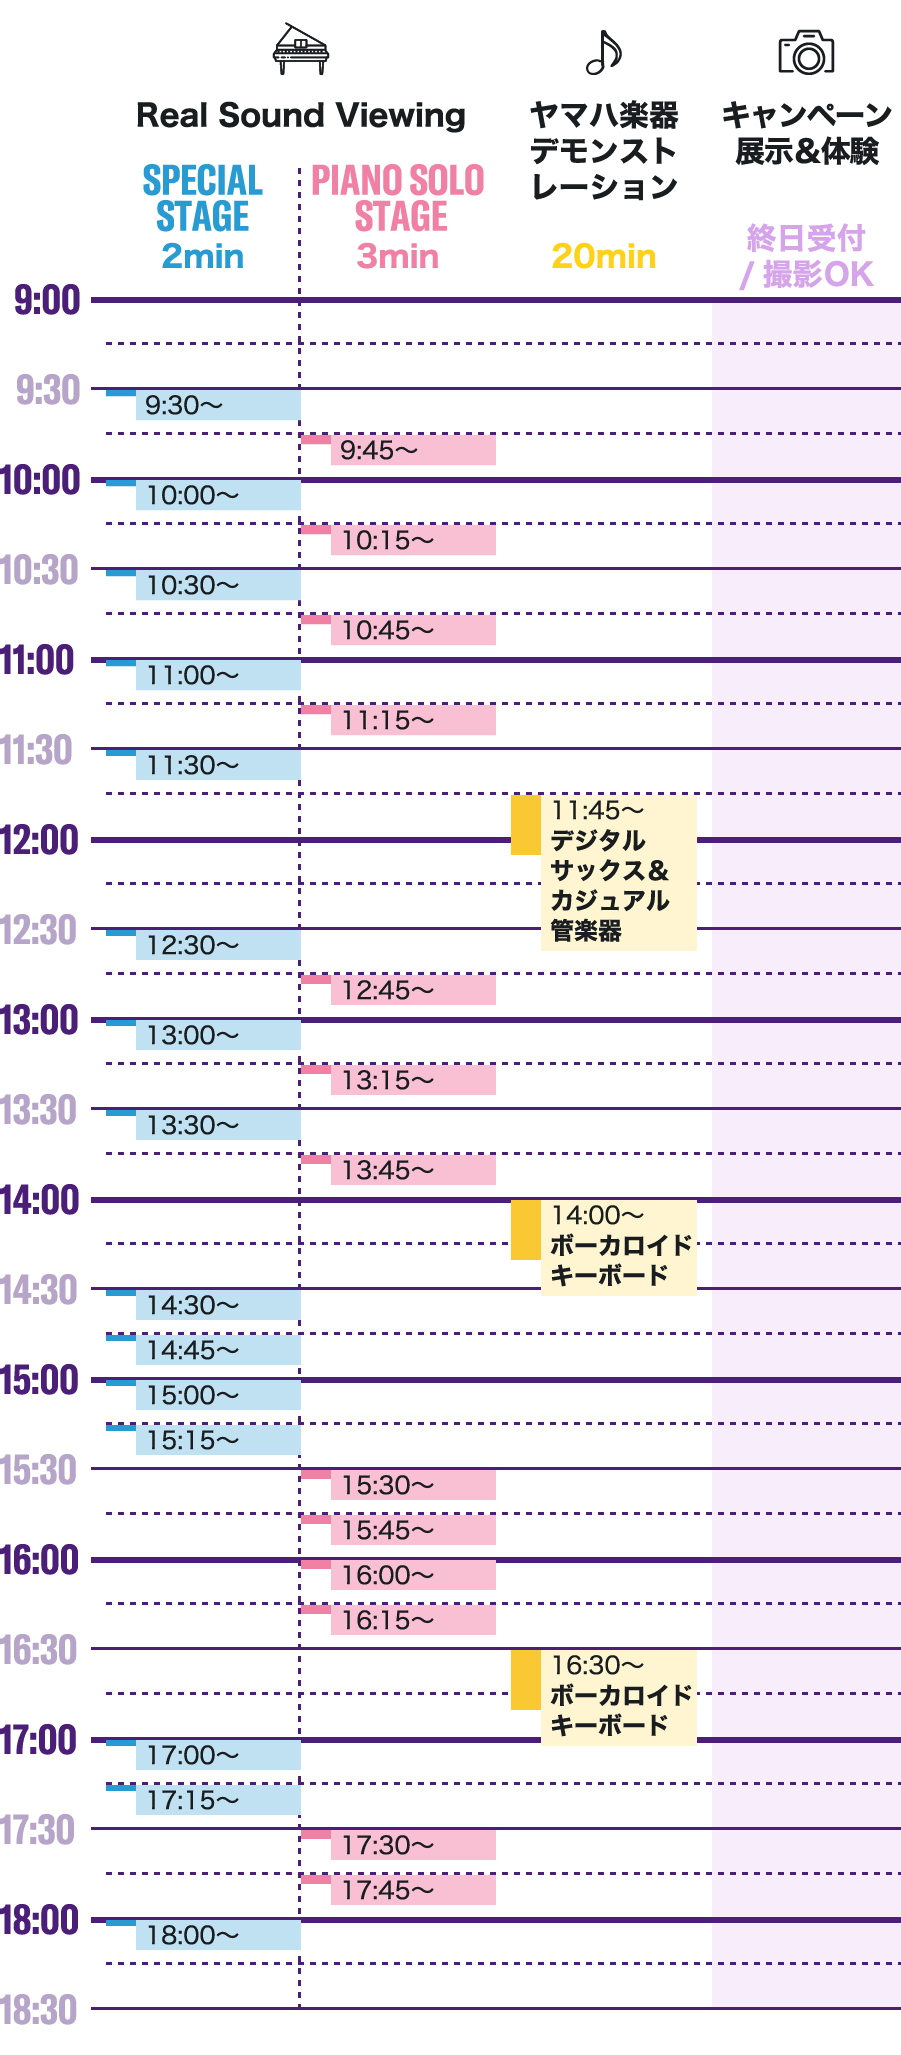 Real Sound Viewing - SPECIAL STAGE（2min）：9:30～ / 10:00～ / 10:30～ / 11:00～ / 11:30～ / 12:30～ / 13:00～ / 13:30～ / 14:30～ / 14:45～ / 15:00～ / 15:15～ / 17:00～ / 17:15～ / 18:00～ | Real Sound Viewing - PIANO SOLO STAGE（3min）：9:45～ / 10:15～ / 10:45～ / 11:15～ / 12:45～ / 13:15～ / 13:45～ / 15:30～ / 15:45～ / 16:00～ / 16:15～ / 17:30～ / 17:45～ | ヤマハ楽器 - デモンストレーション（20min）：11:45～ デジタルサックス＆カジュアル管楽器デモンストレーション / 14:00～ ボーカロイドキーボードデモンストレーション / 16:30～ ボーカロイドキーボードデモンストレーション